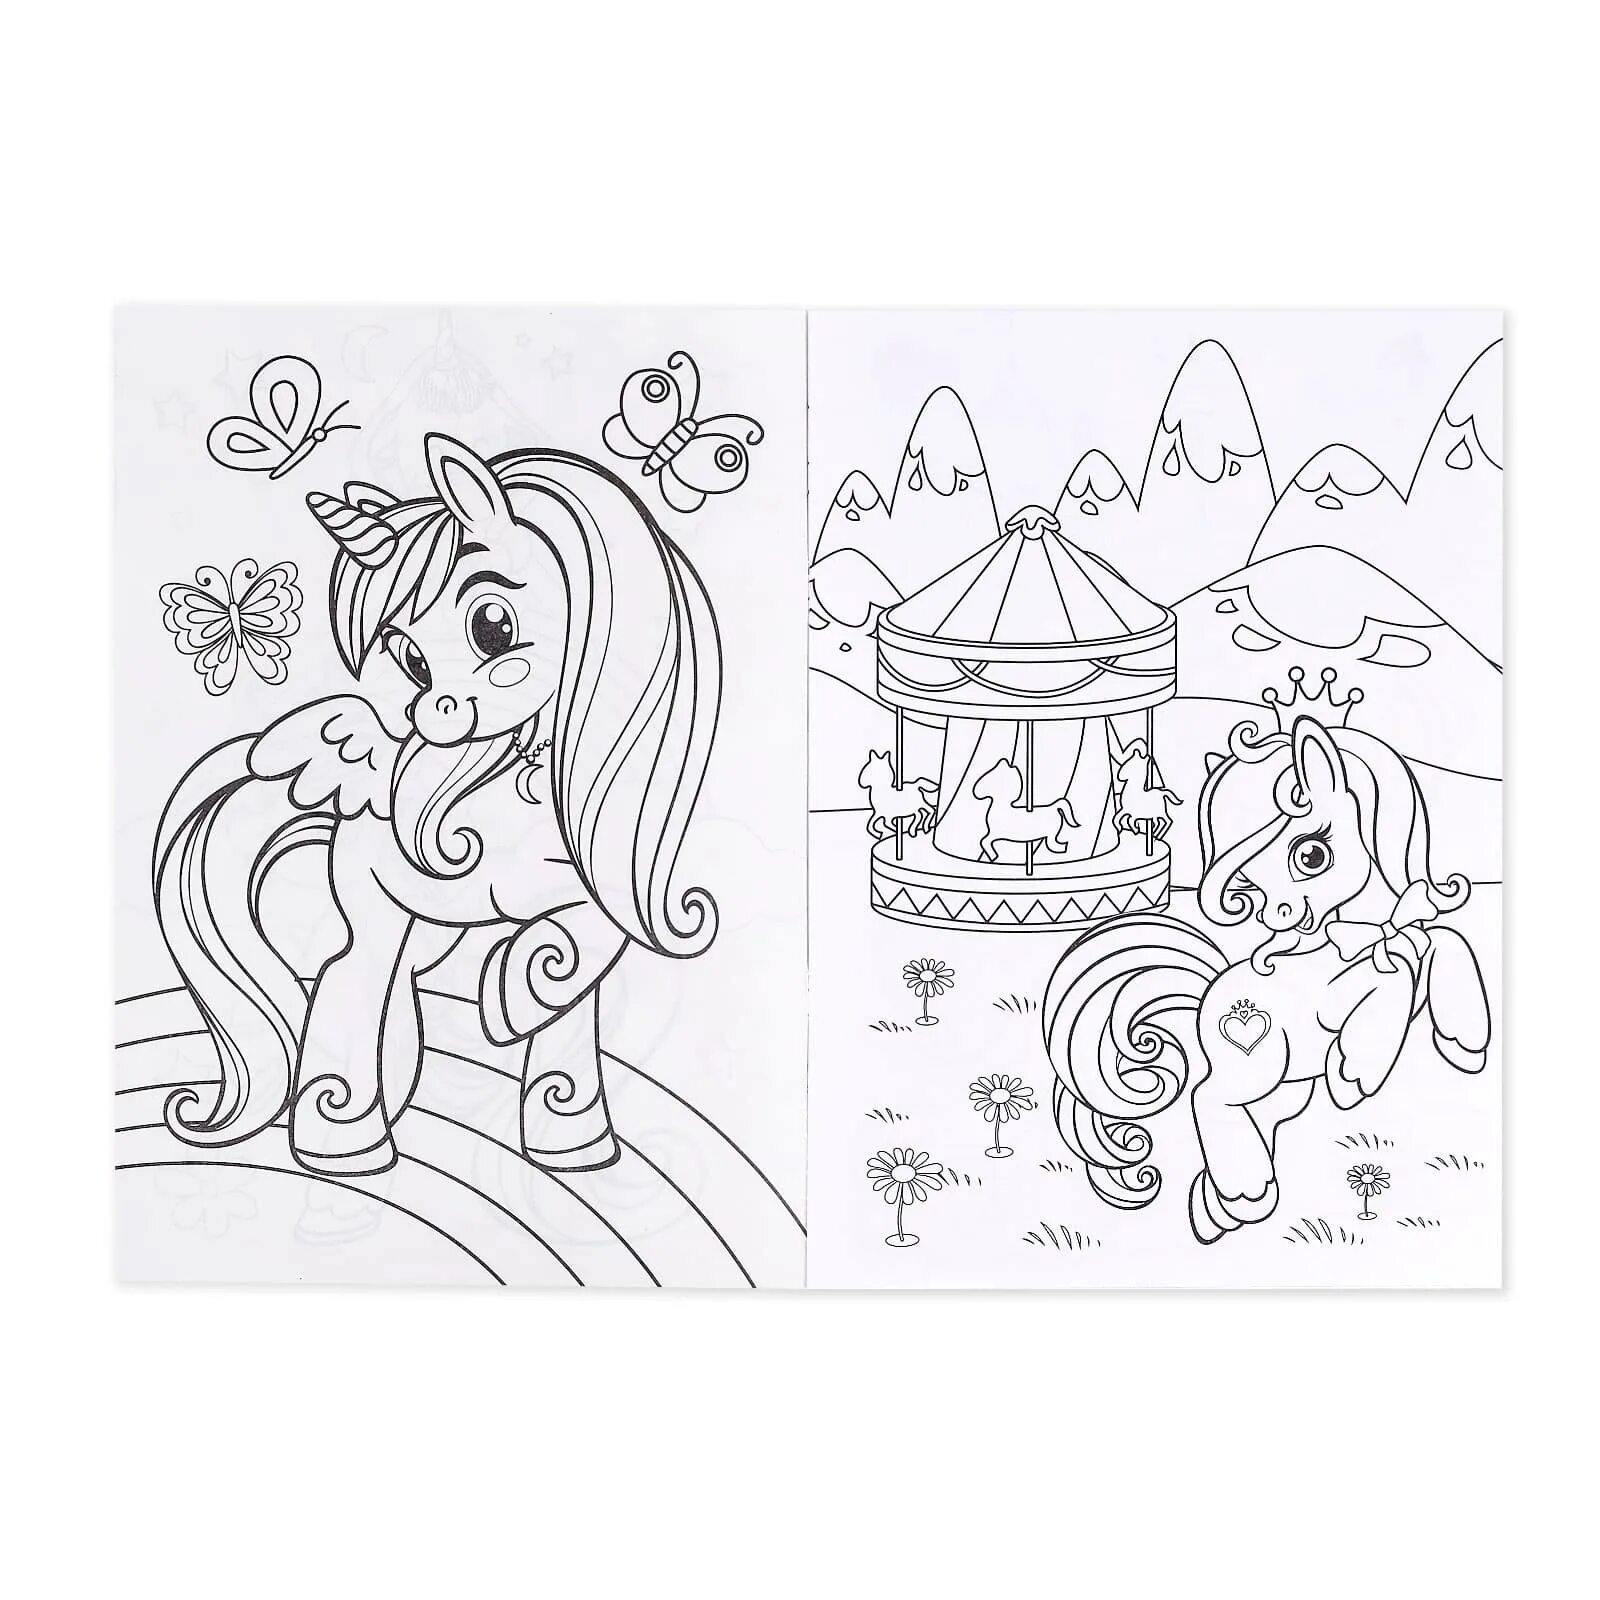 Ambitious coloring page 4 for girls